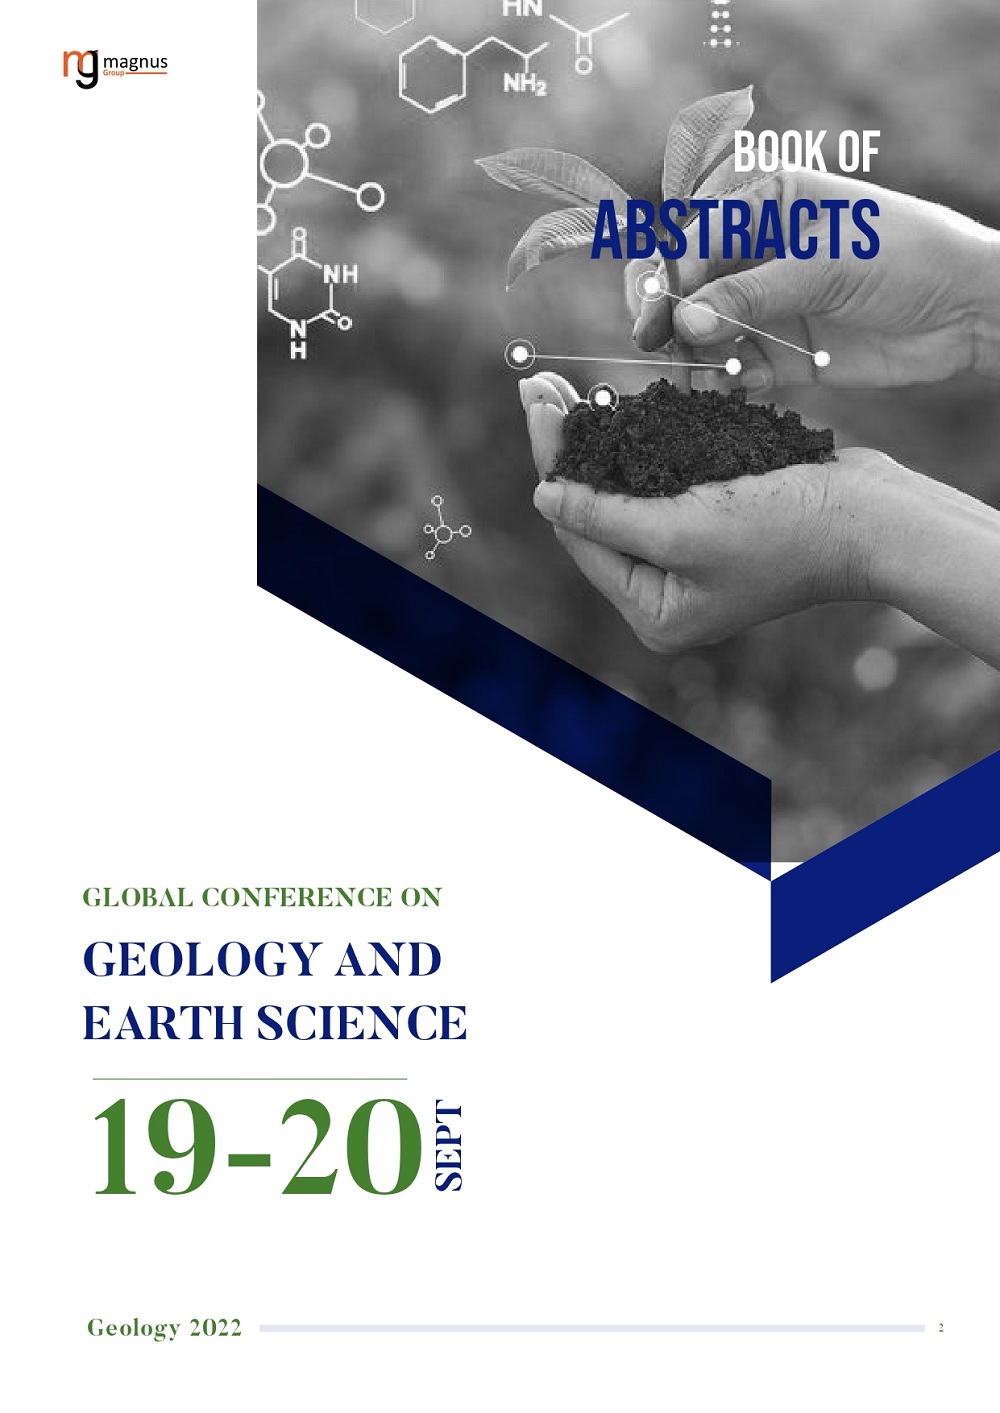 Geology and Earth Science | Online Event Event Book